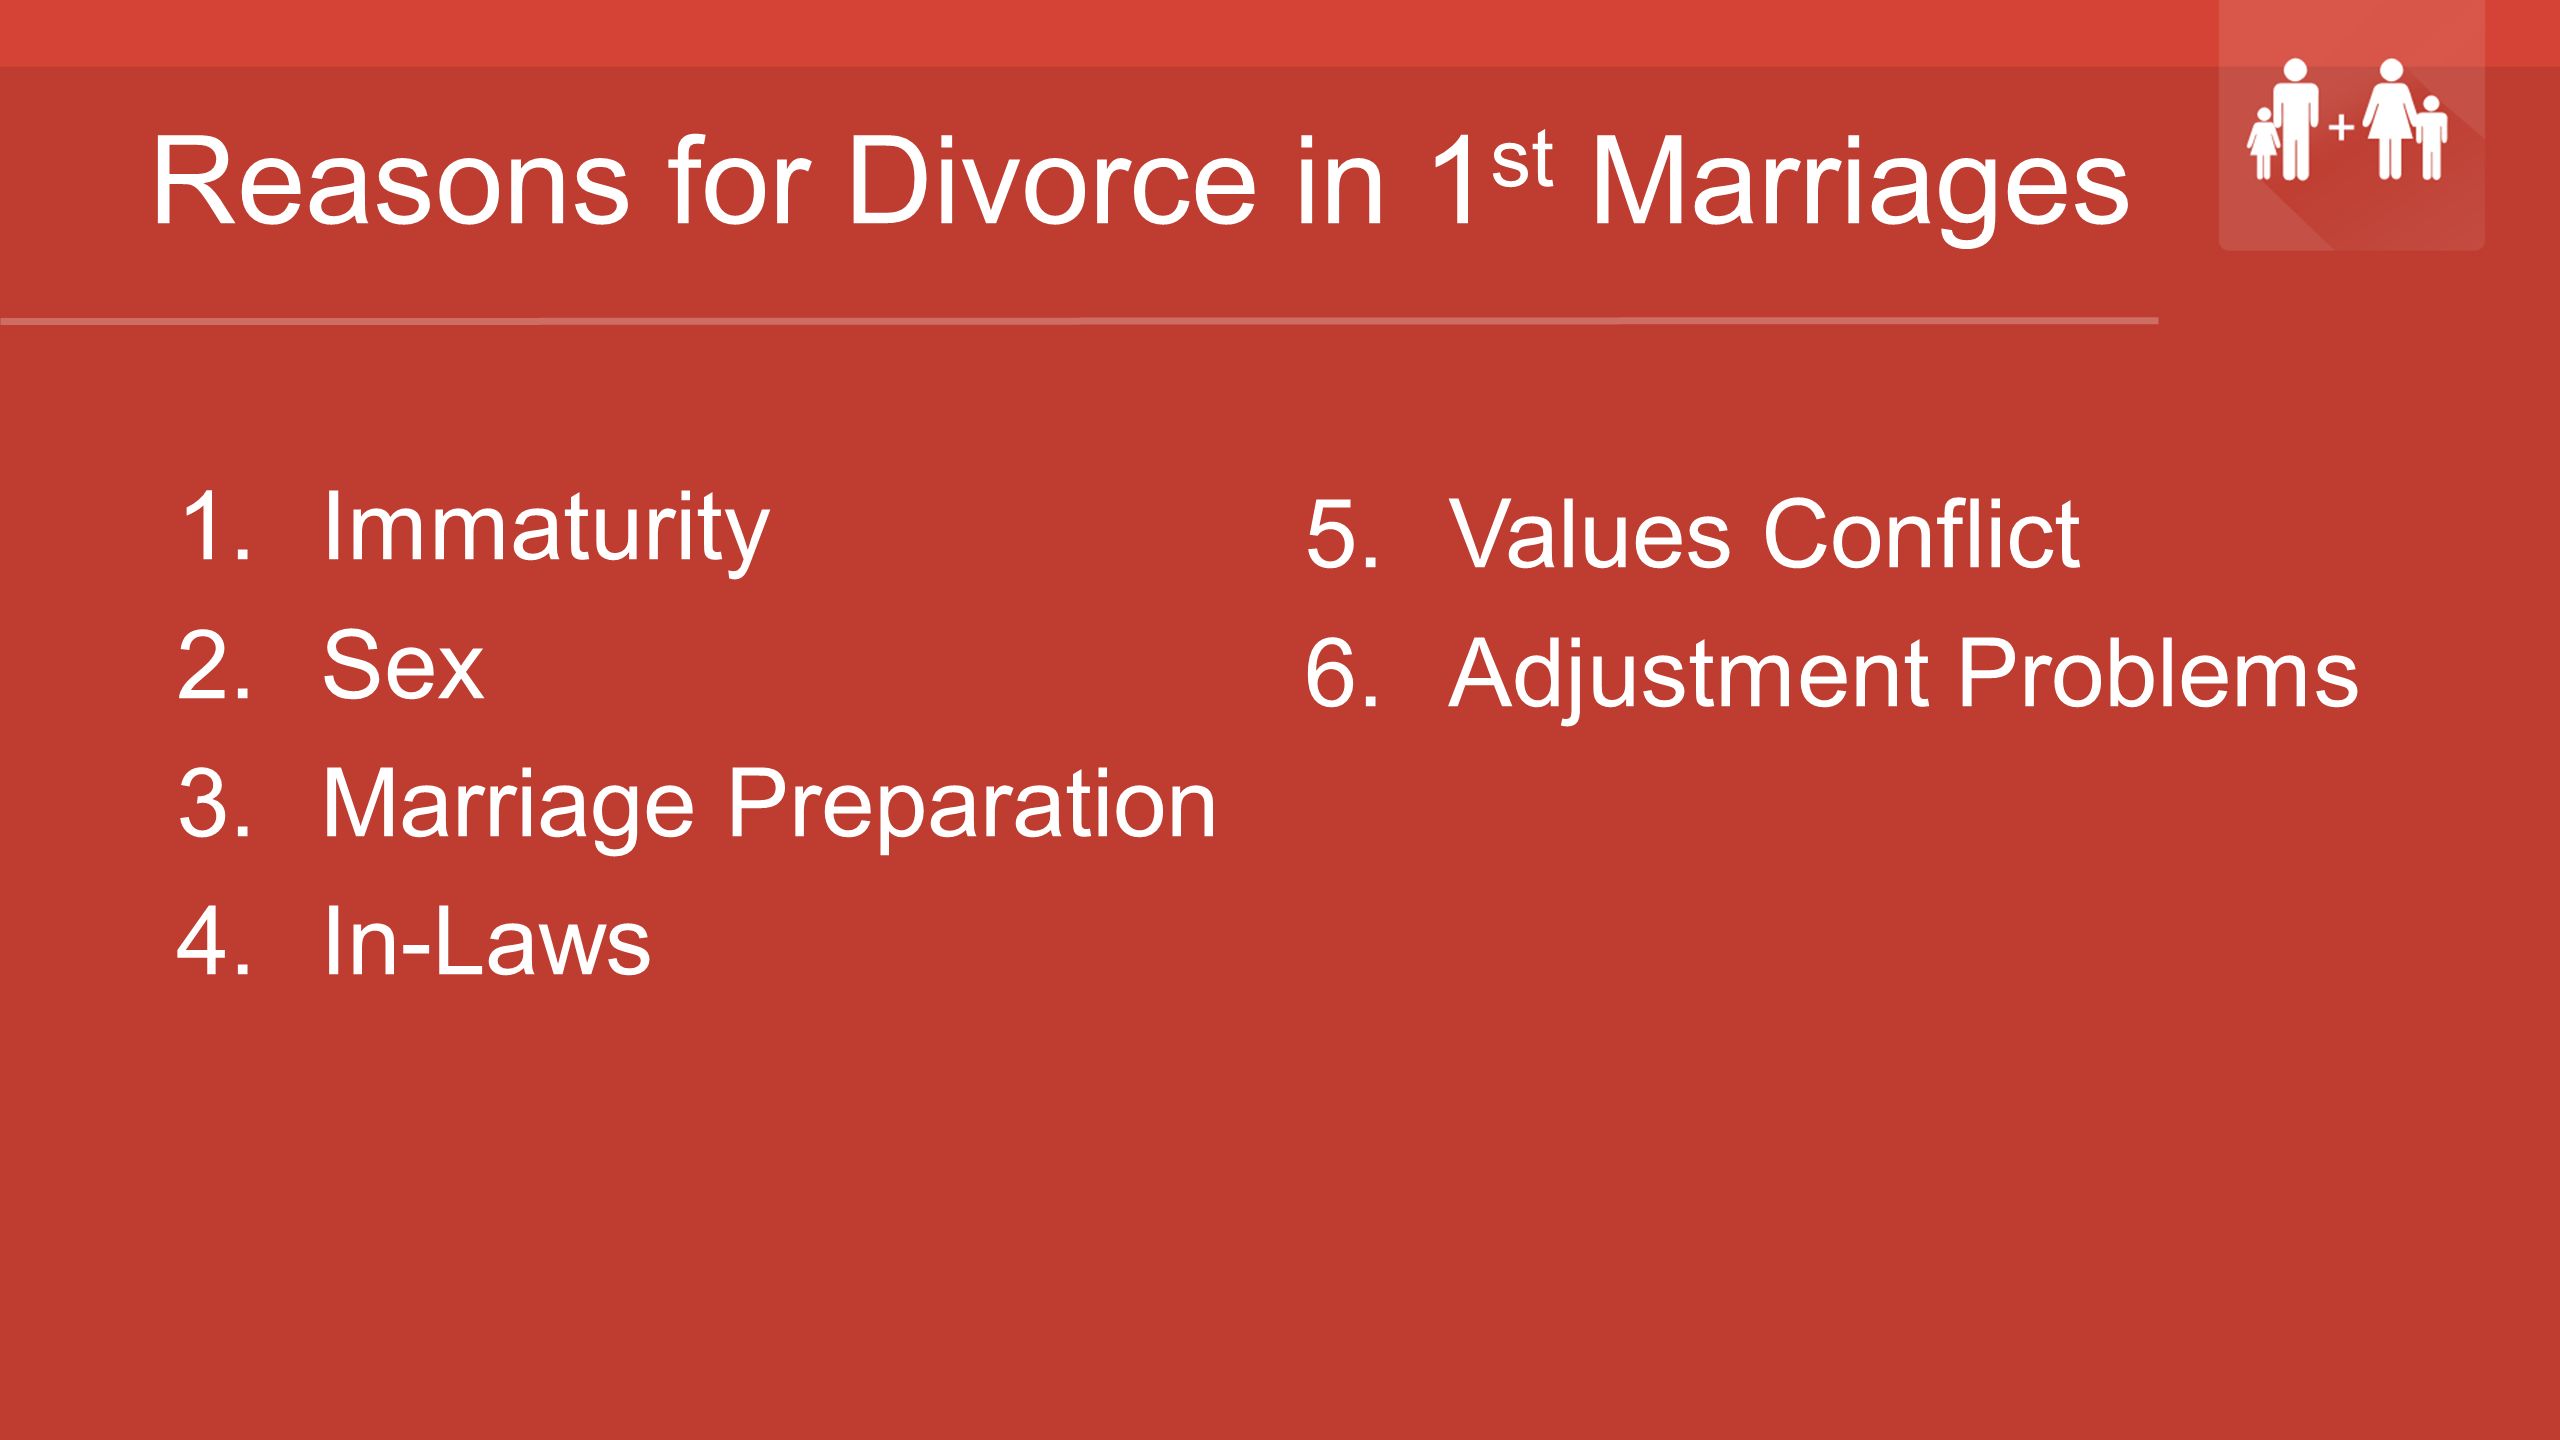 Reasons for Divorce in 1 st Marriages 1.Immaturity 2.Sex 3.Marriage Preparation 4.In-Laws 5.Values Conflict 6.Adjustment Problems